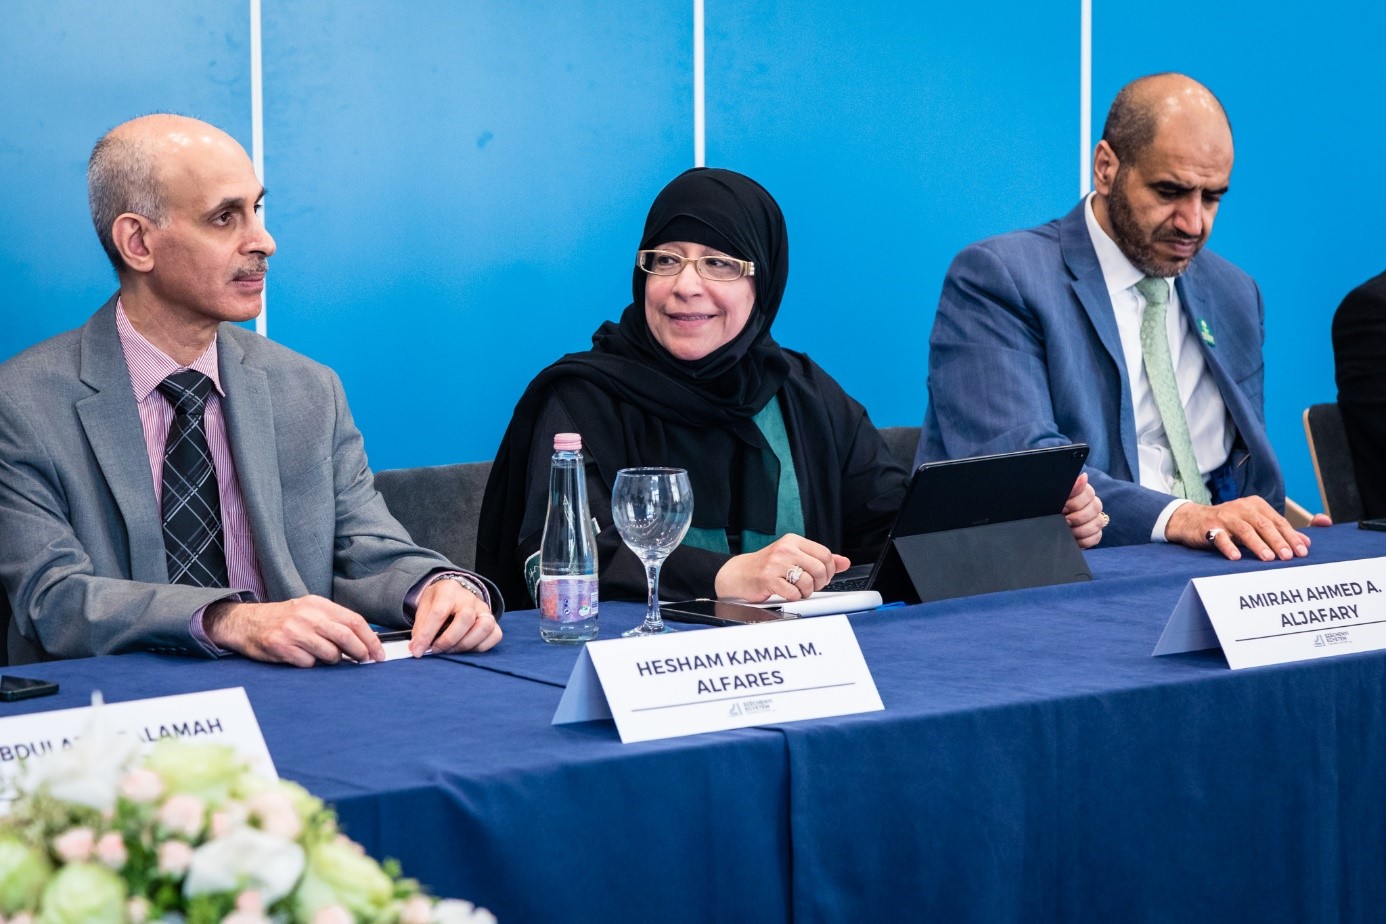 Dr. Amirah Ahmed A. Aljafary (centre), representative of the Human Rights Committee of the Shura Council